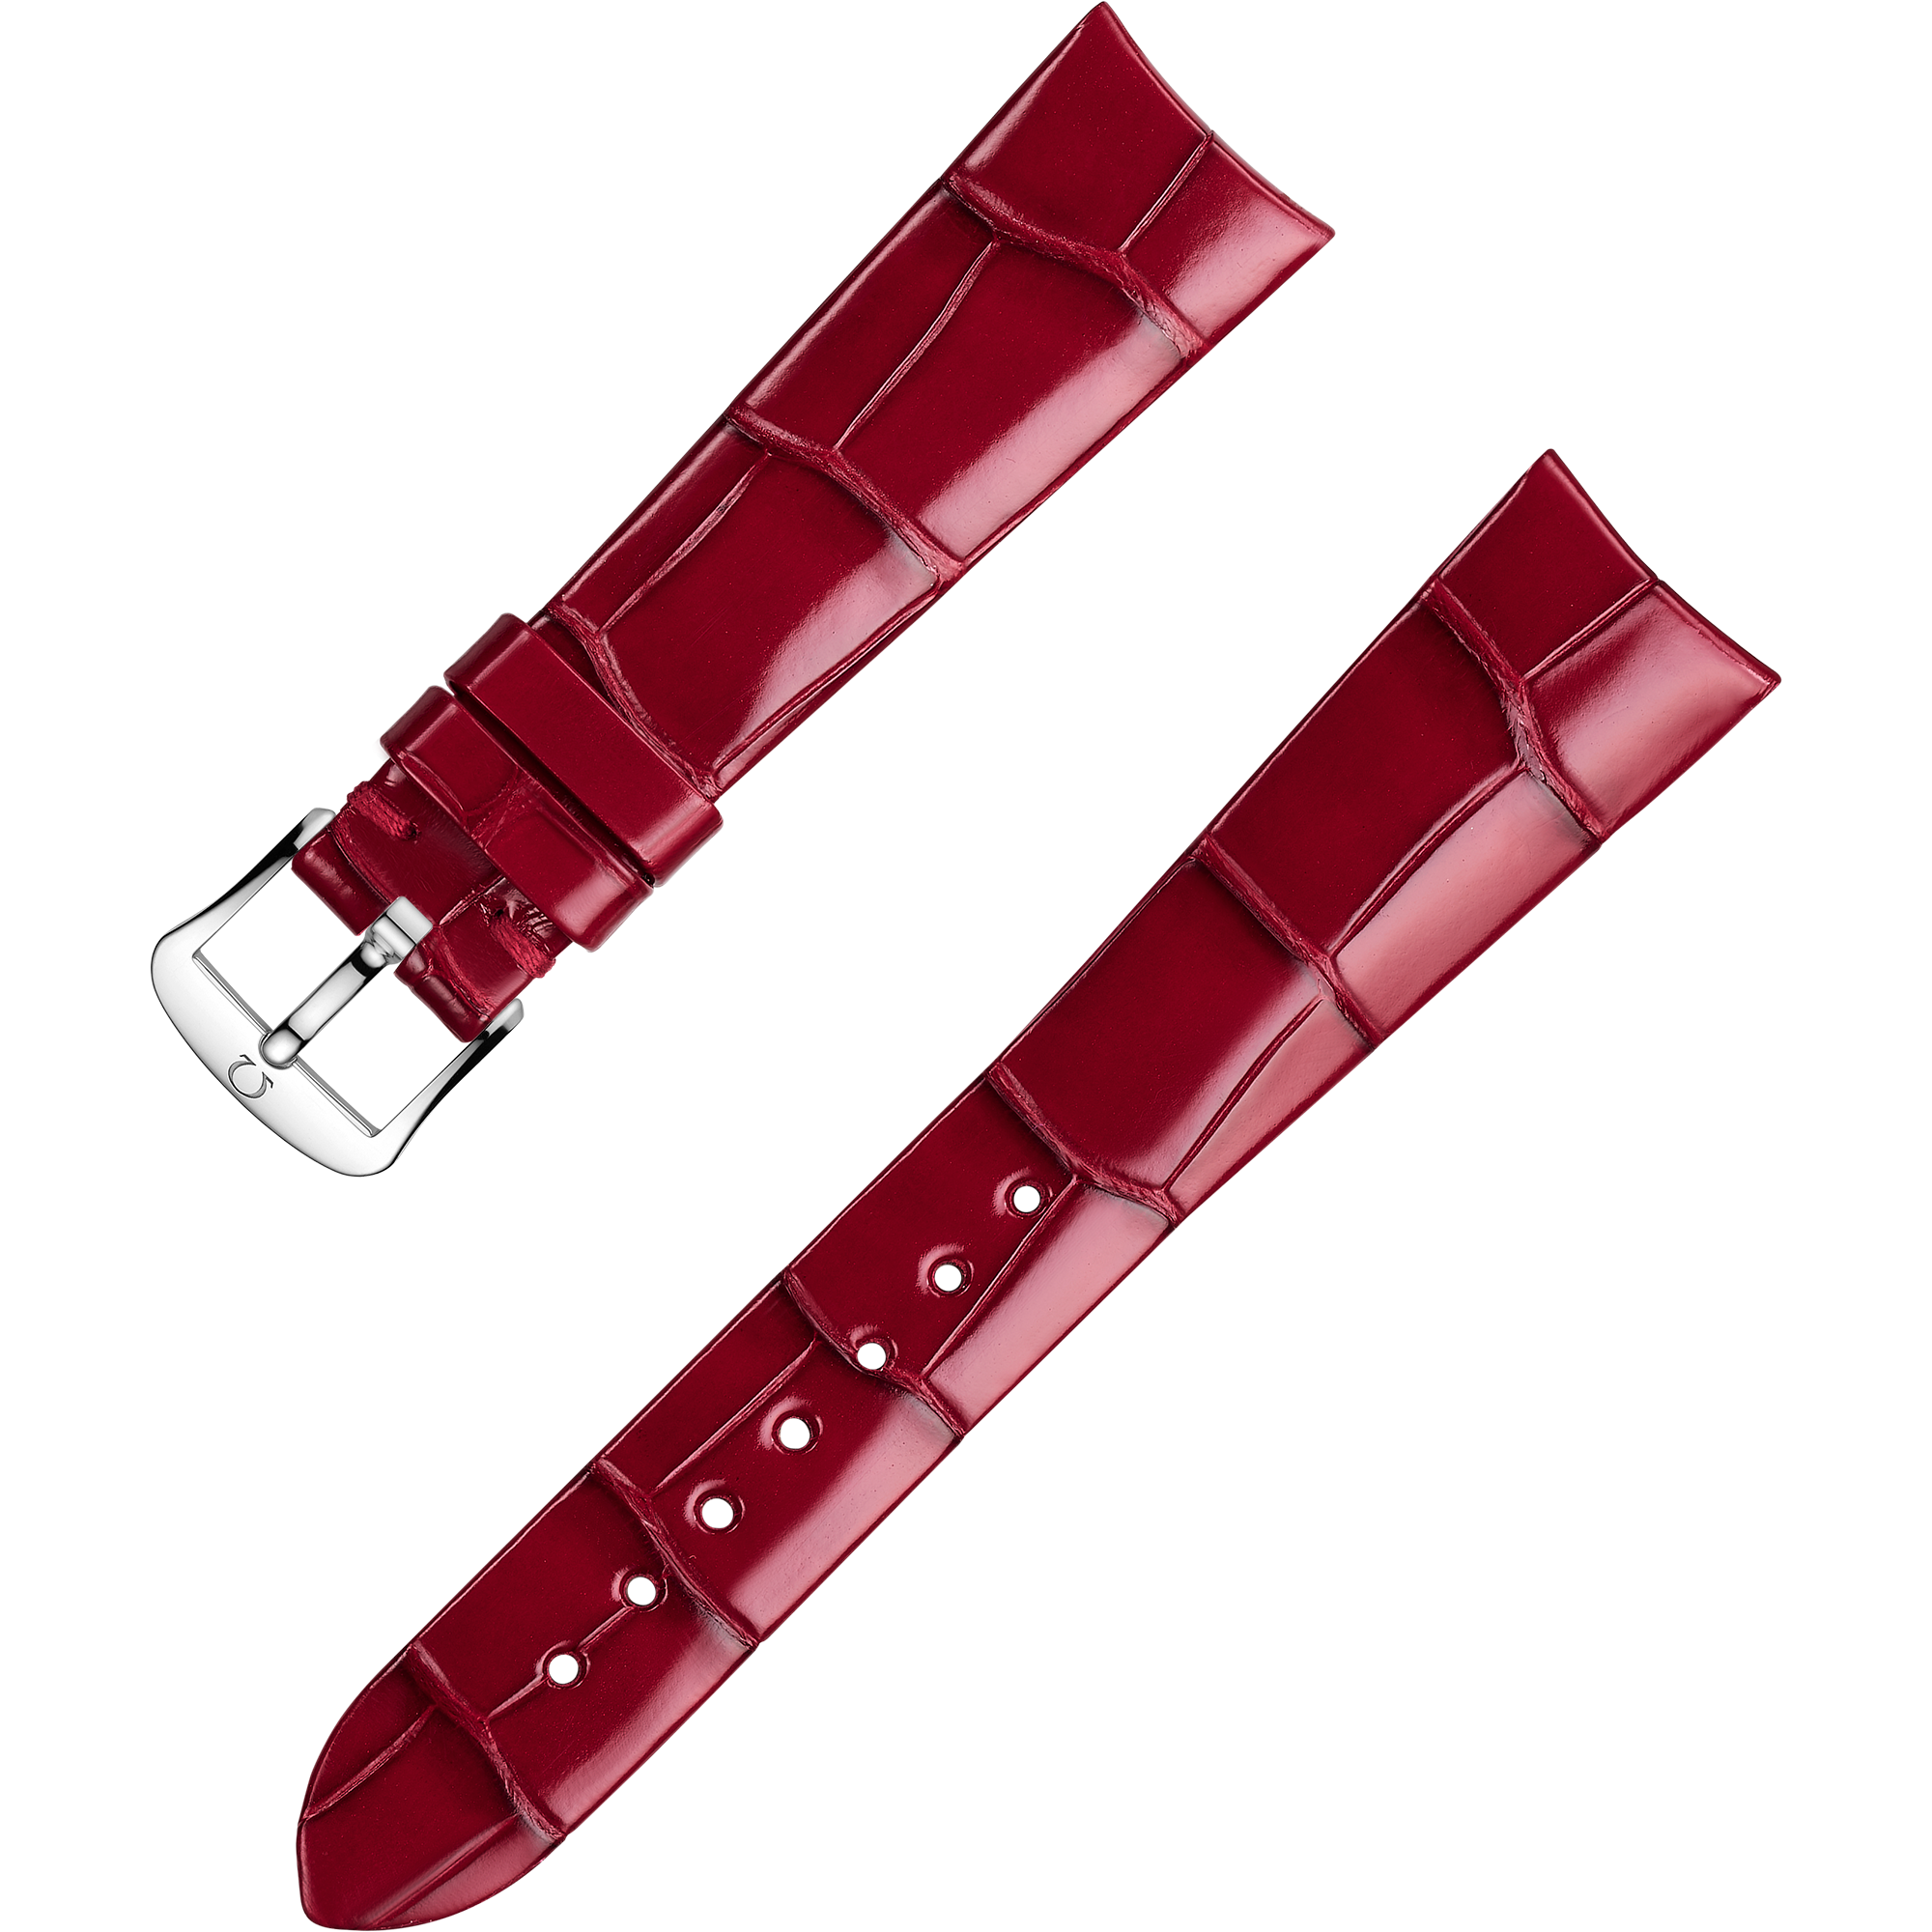 Two-piece strap - Red alligator leather strap with pin buckle - 032CUZ012325